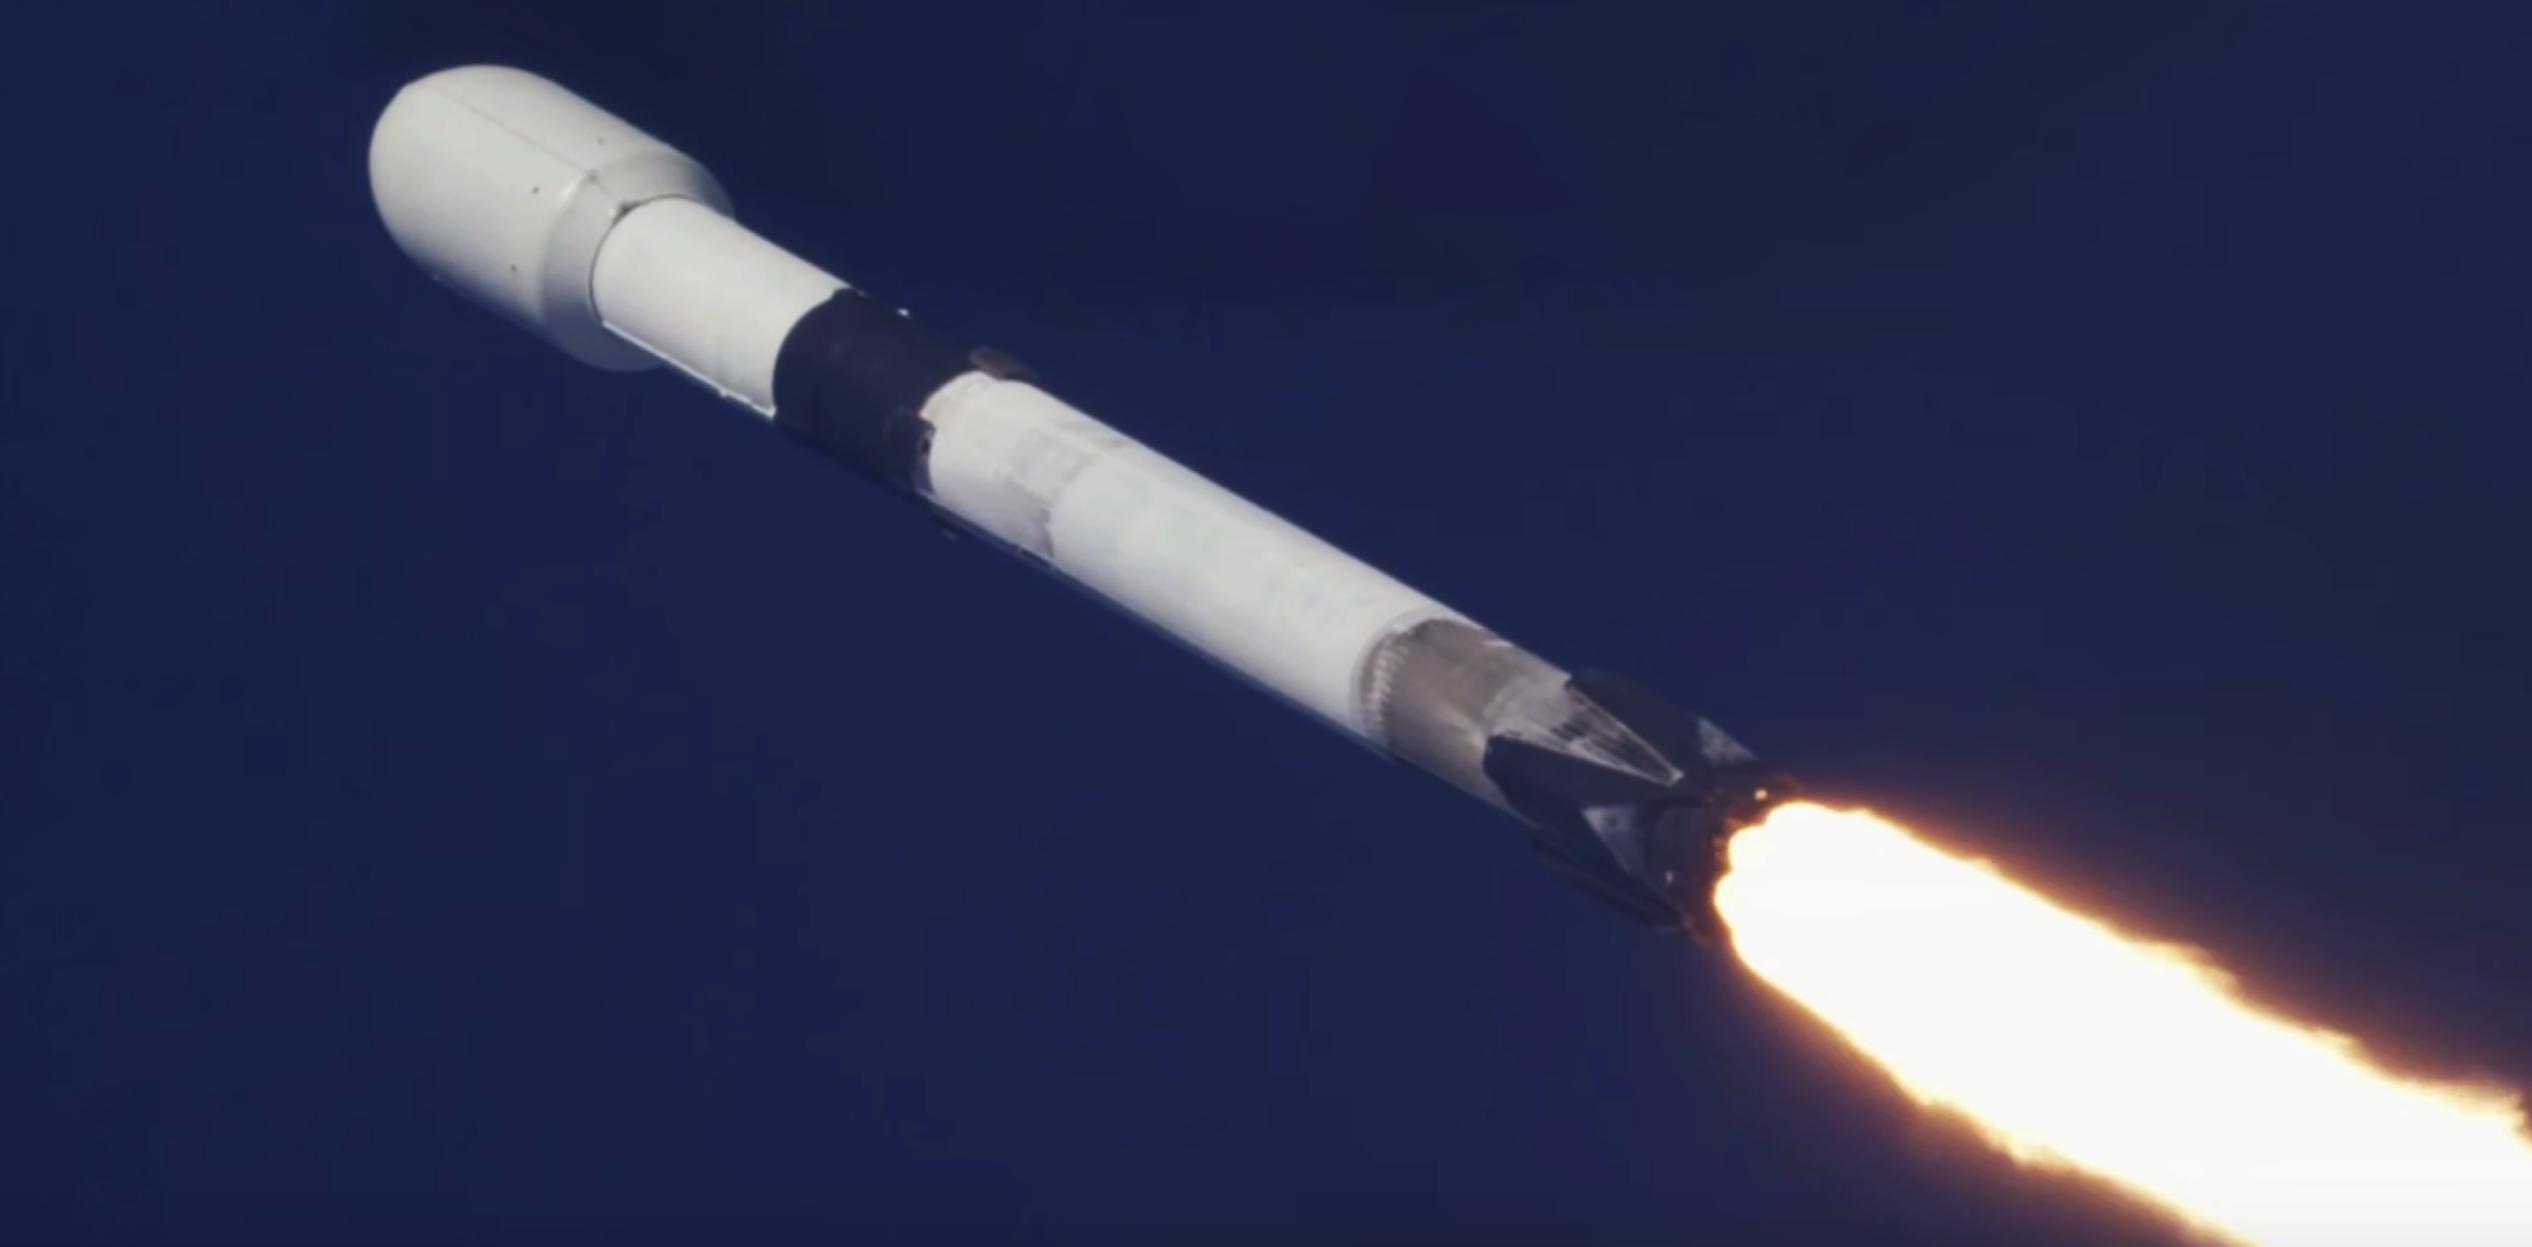 Spacex Launch / SpaceX launch for ISS resupply mission delayed by one day ... - Spacex has launched 1,740 starlink satellites to date, with its first generation system beginning launches in november 2019.